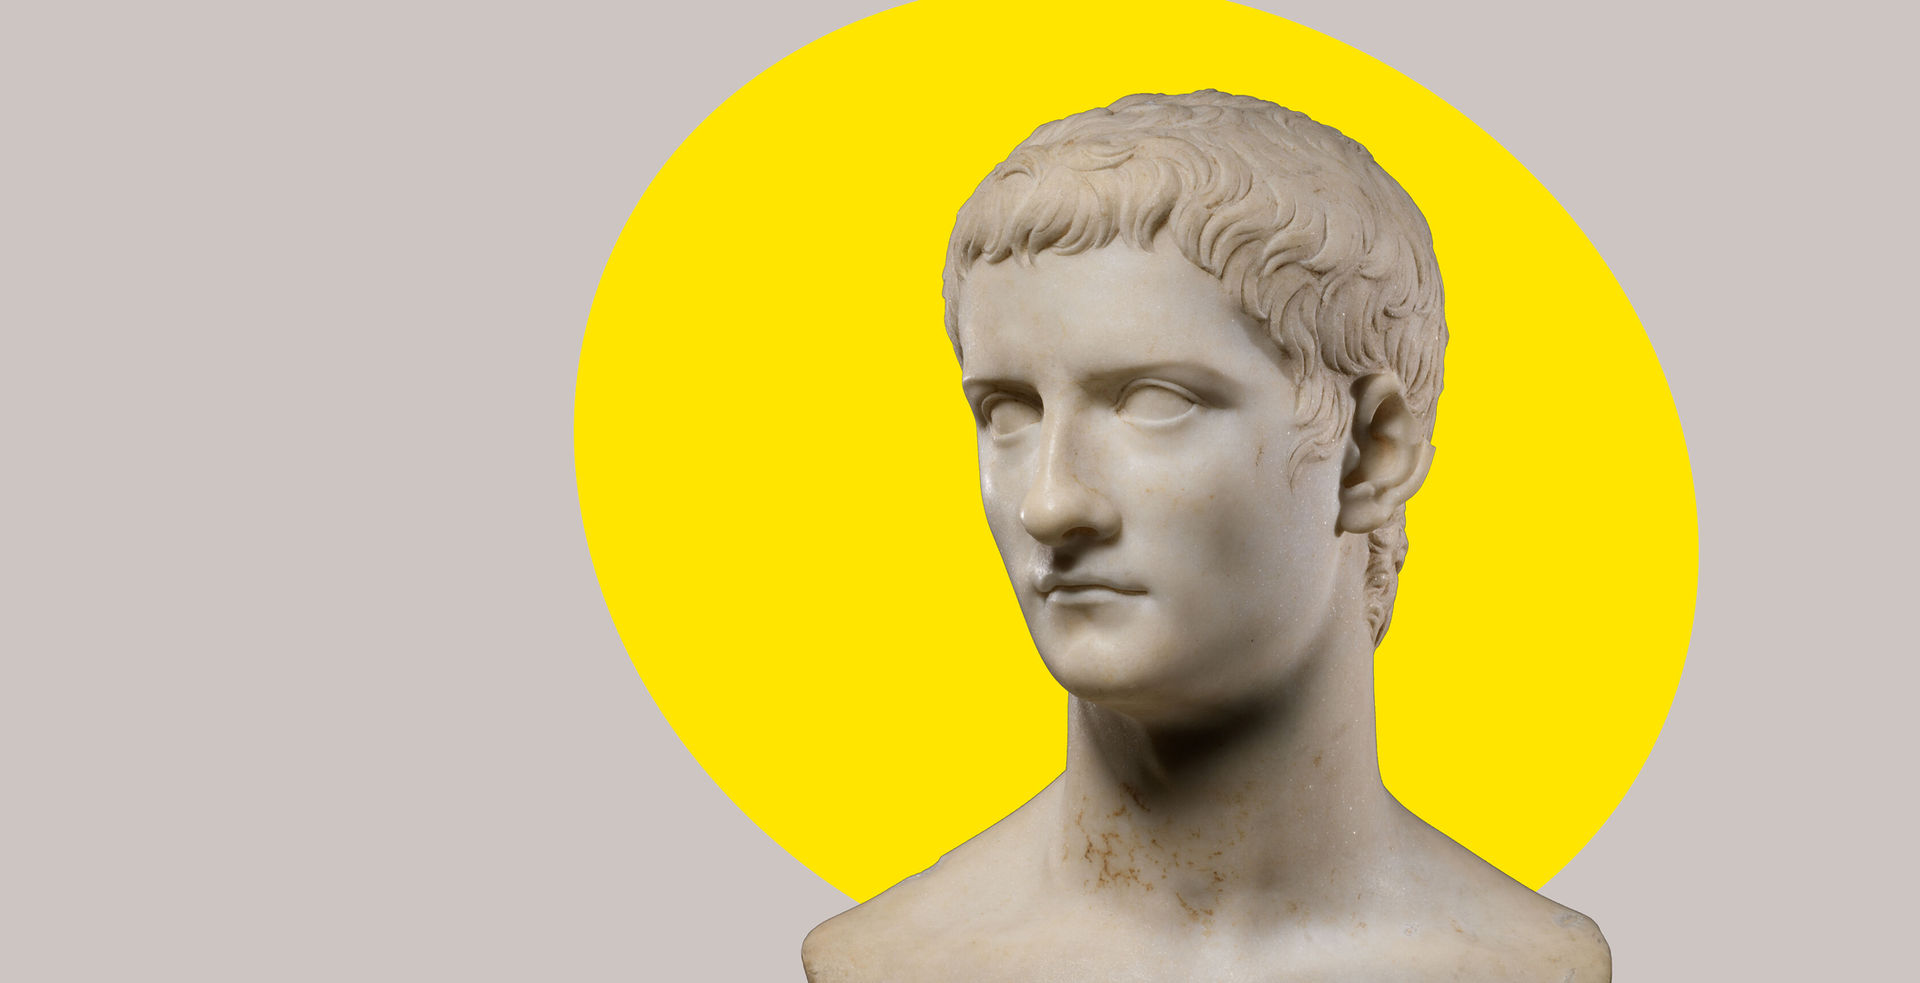 Marble portrait bust of Caligula, with a bright yellow ovular spotlight shape behind the figure in the background